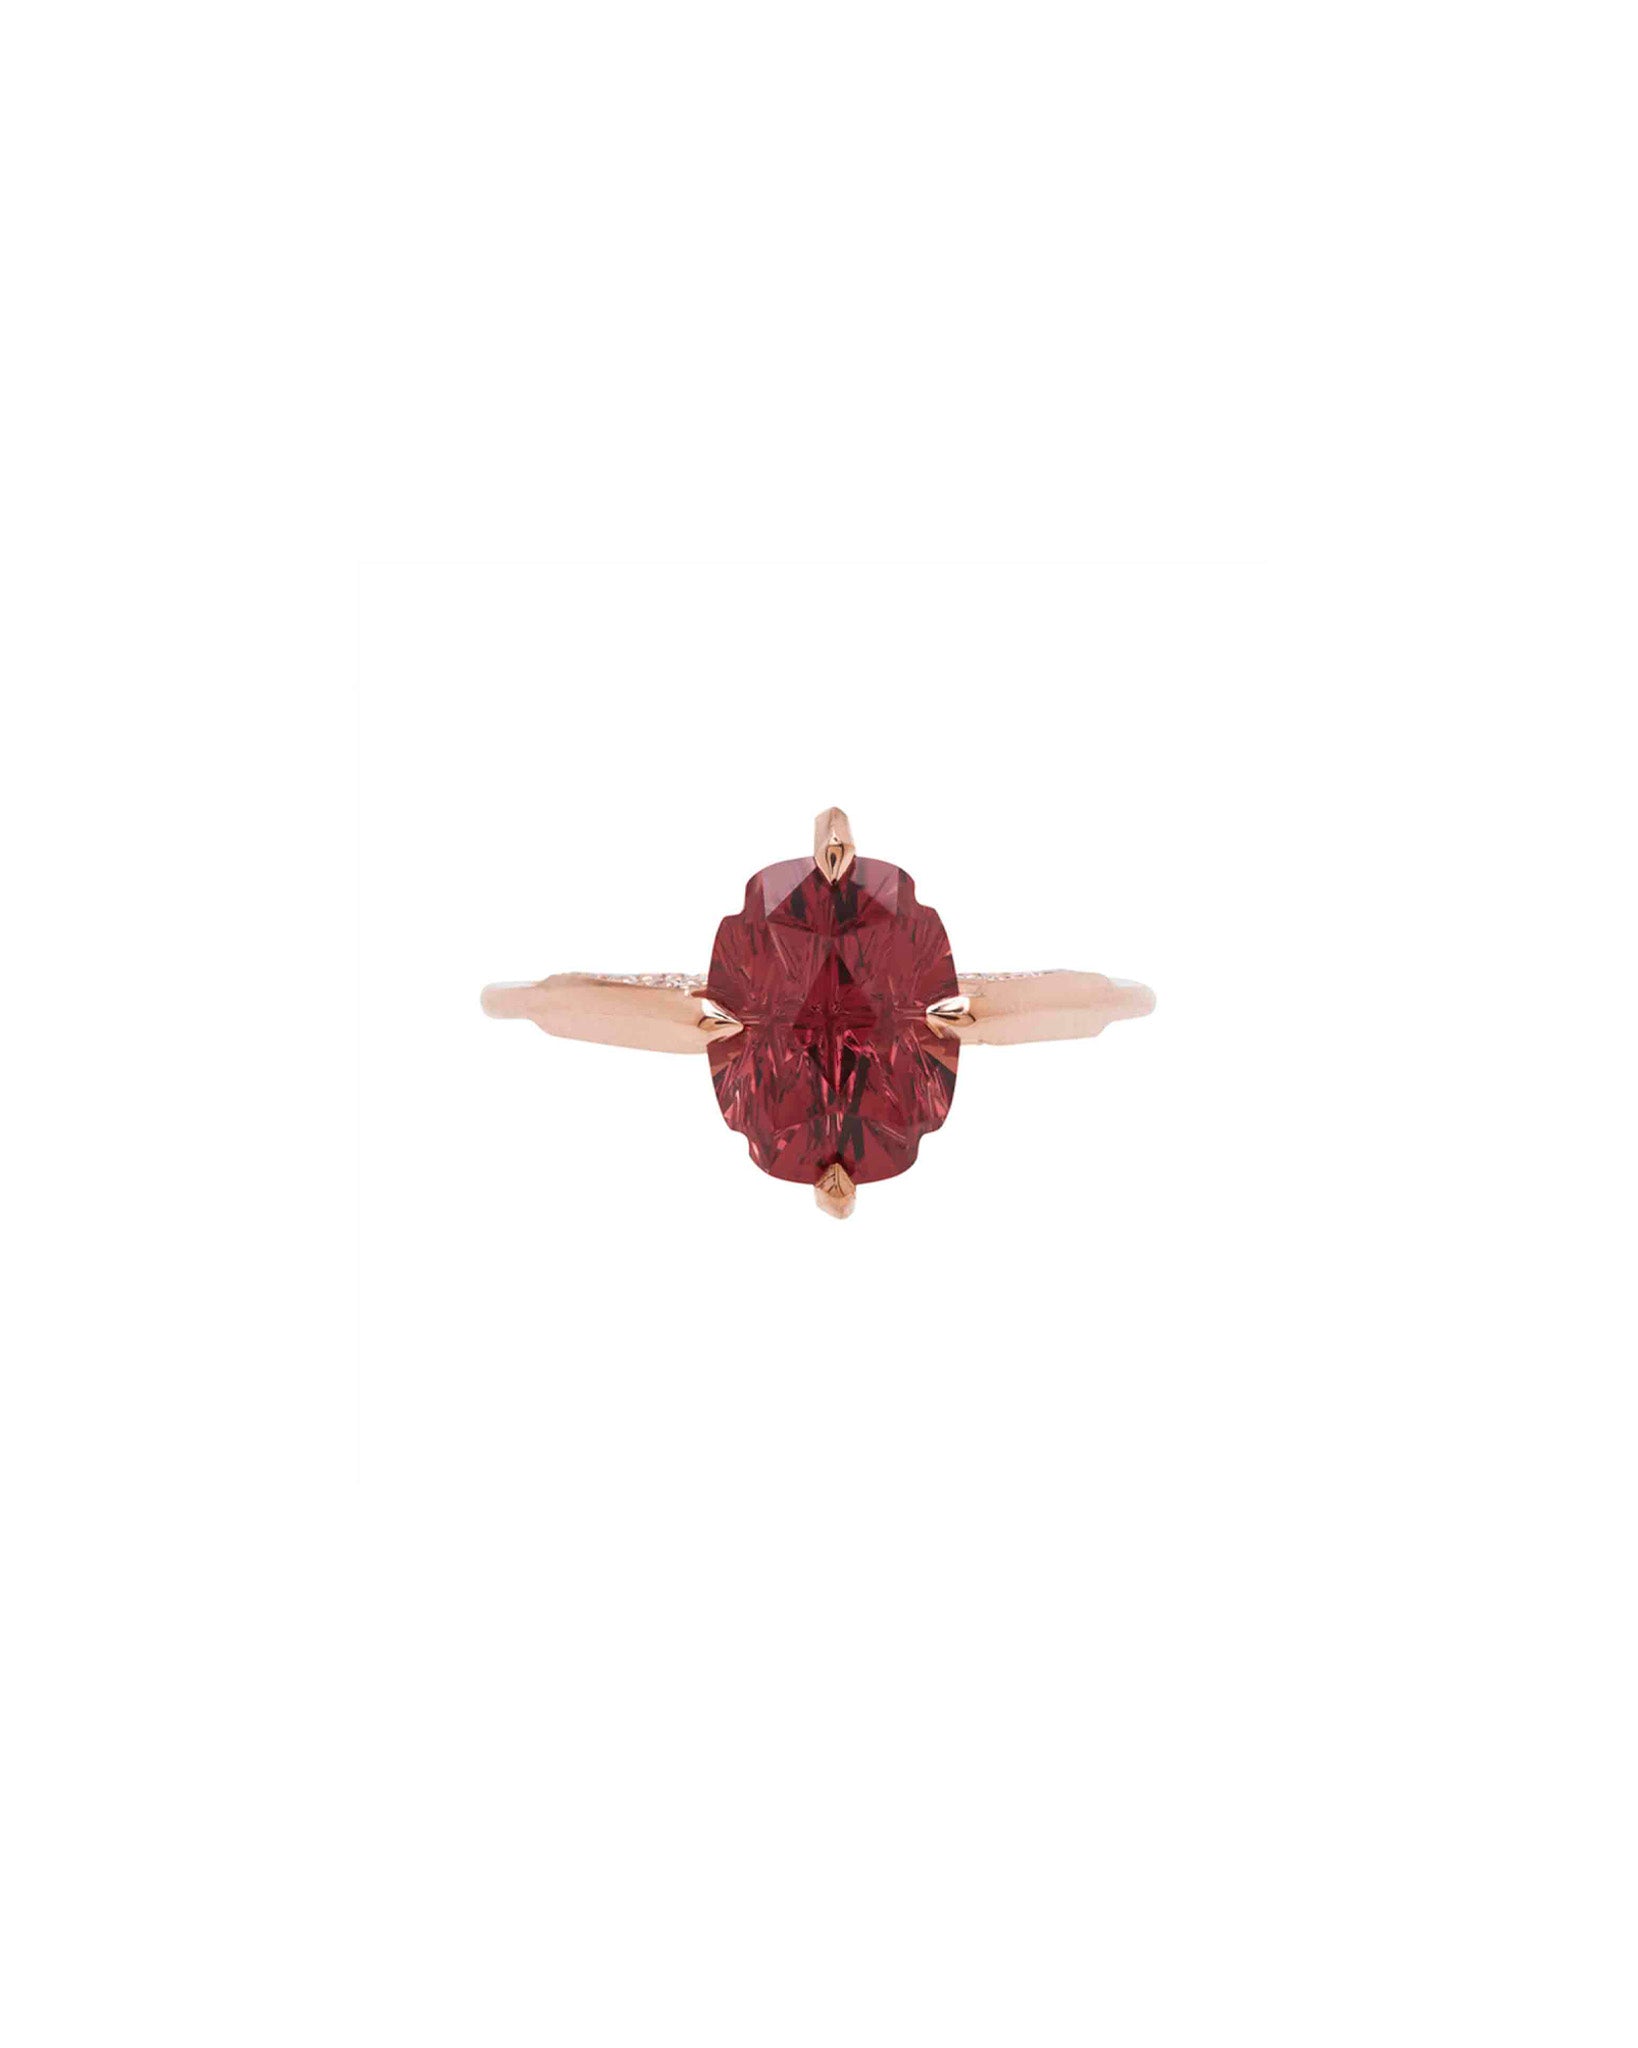 Bliss Lau Minimalist Ring in gold and garnet with pave diamonds.